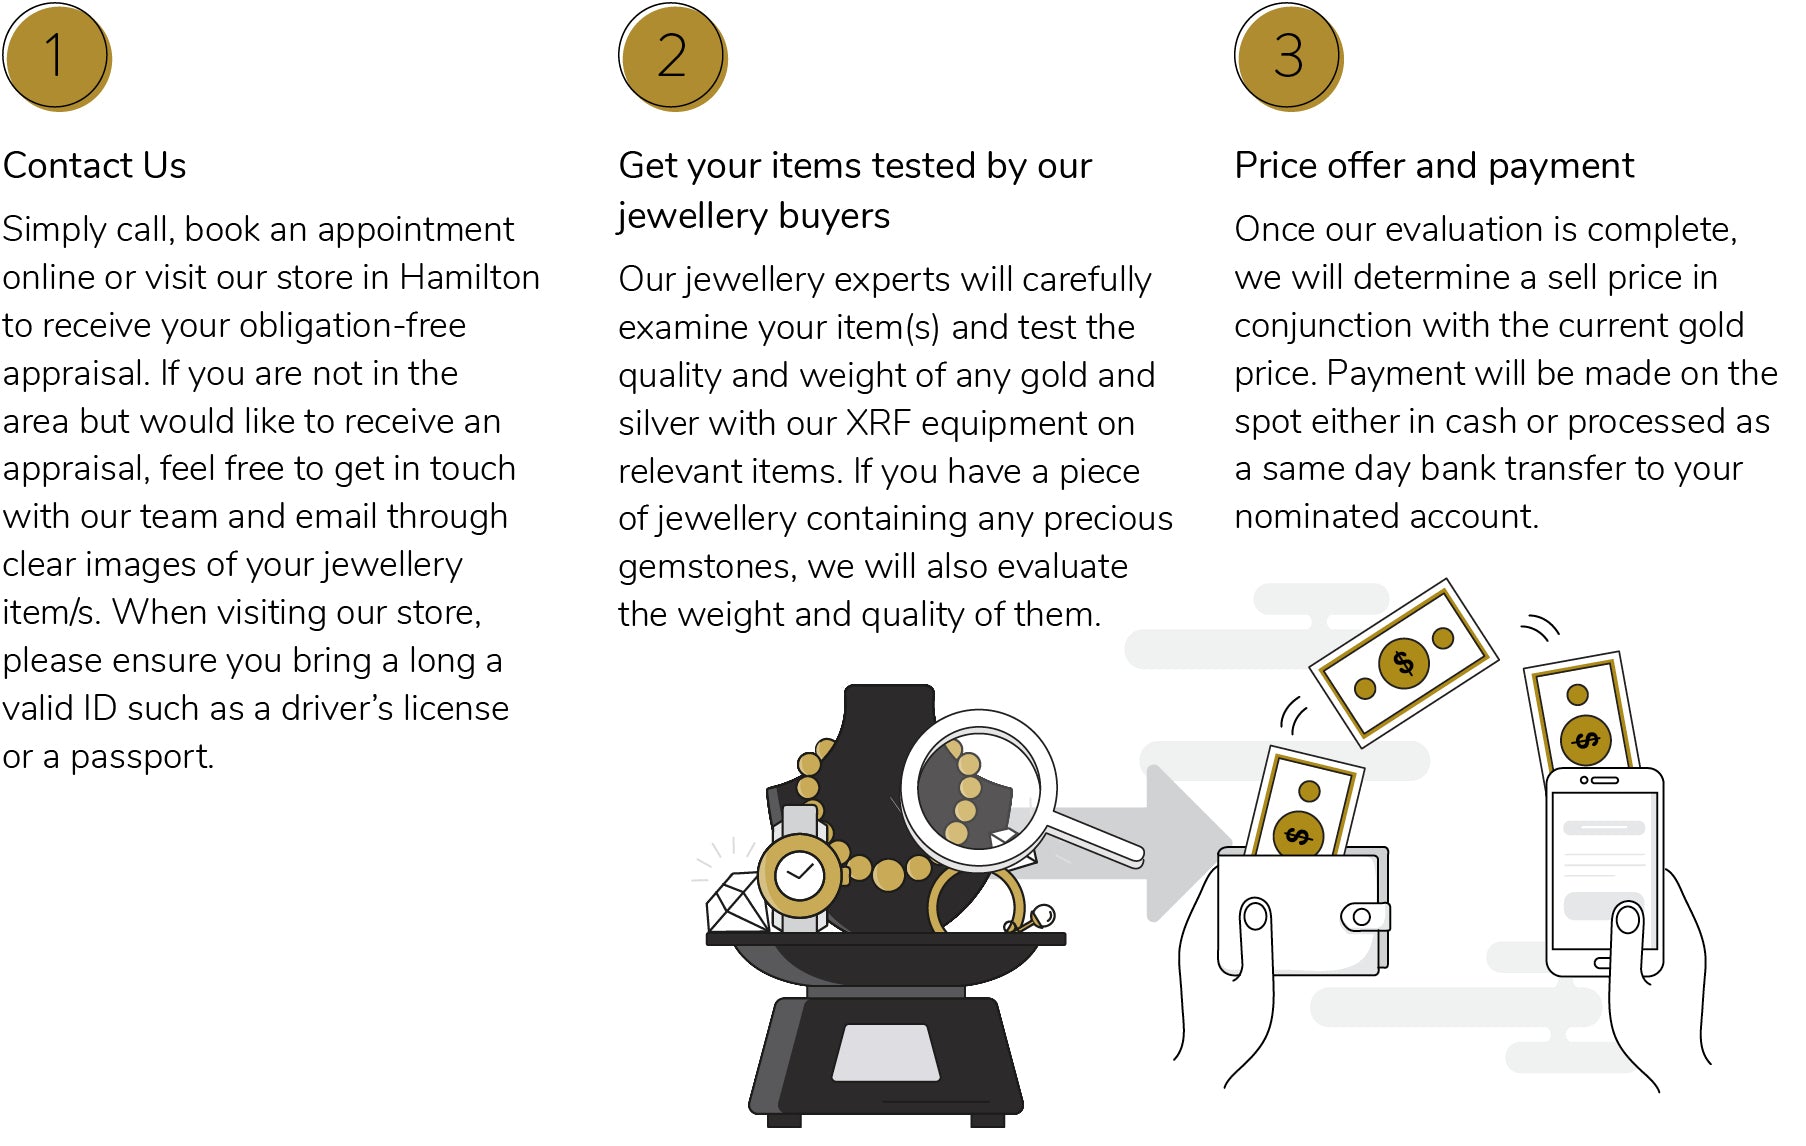 HOW TO SELL YOUR JEWELLERY